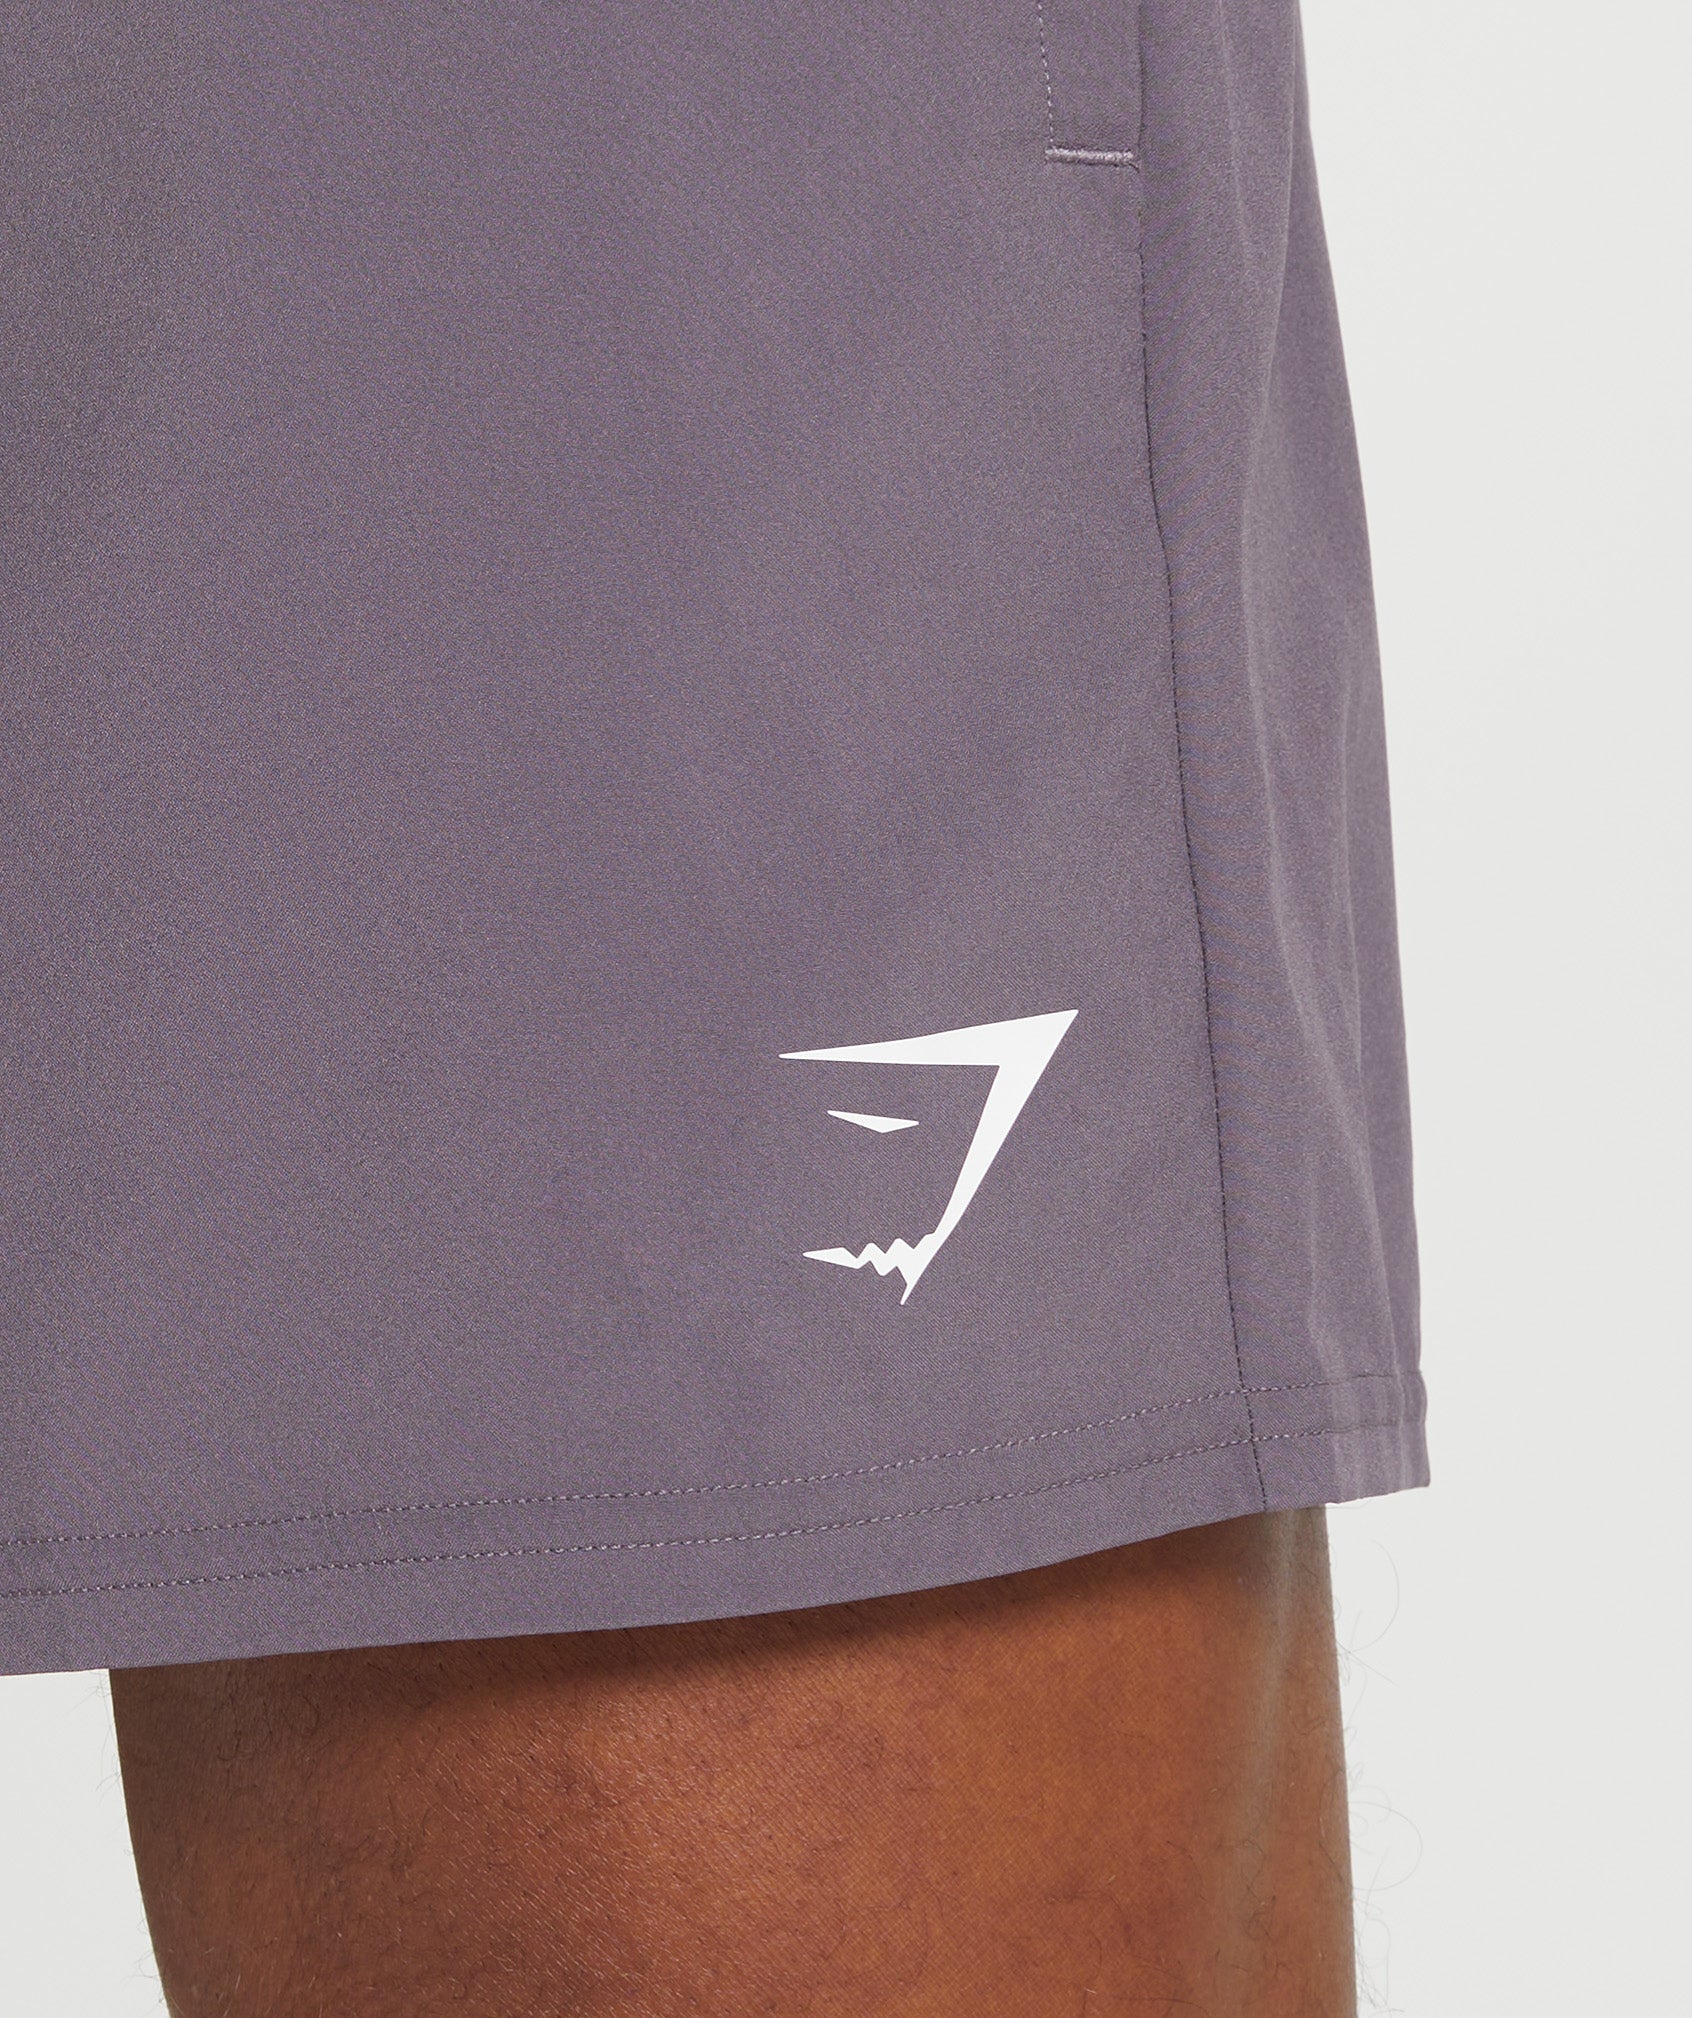 Arrival 5" Shorts in Musk Lilac - view 3